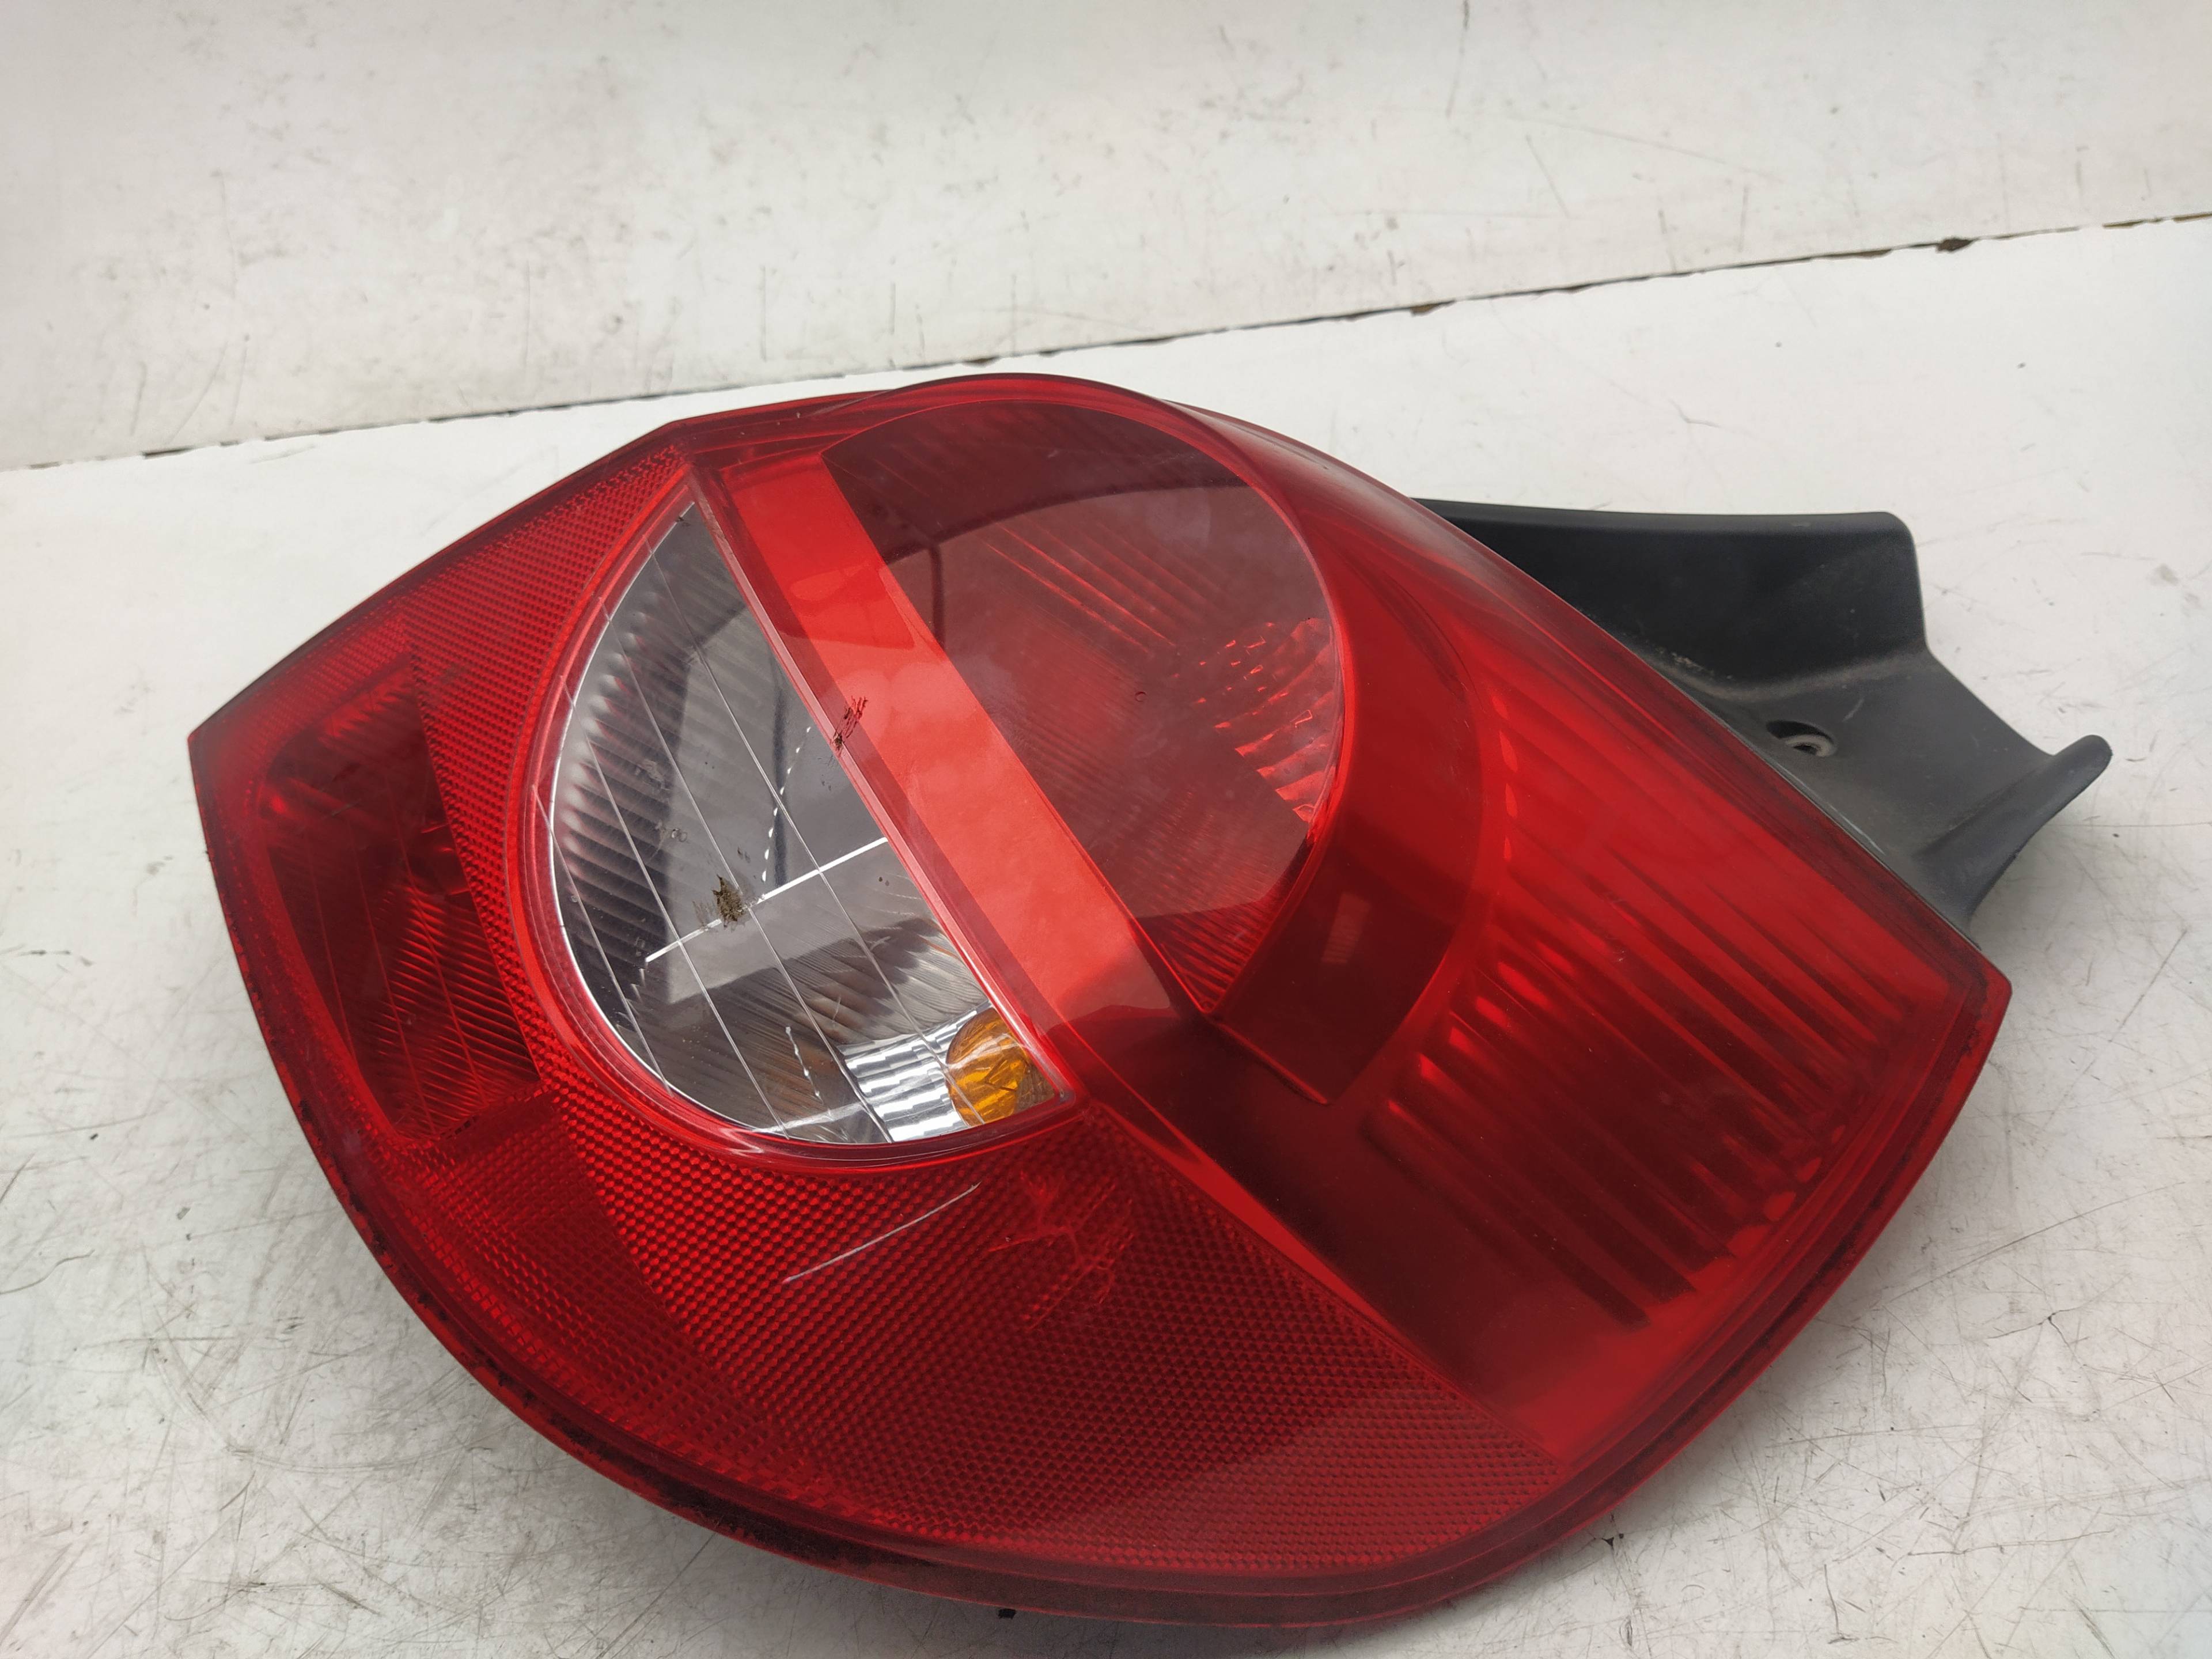 RENAULT Clio 2 generation (1998-2013) Rear Right Taillight Lamp 89035080 18578575